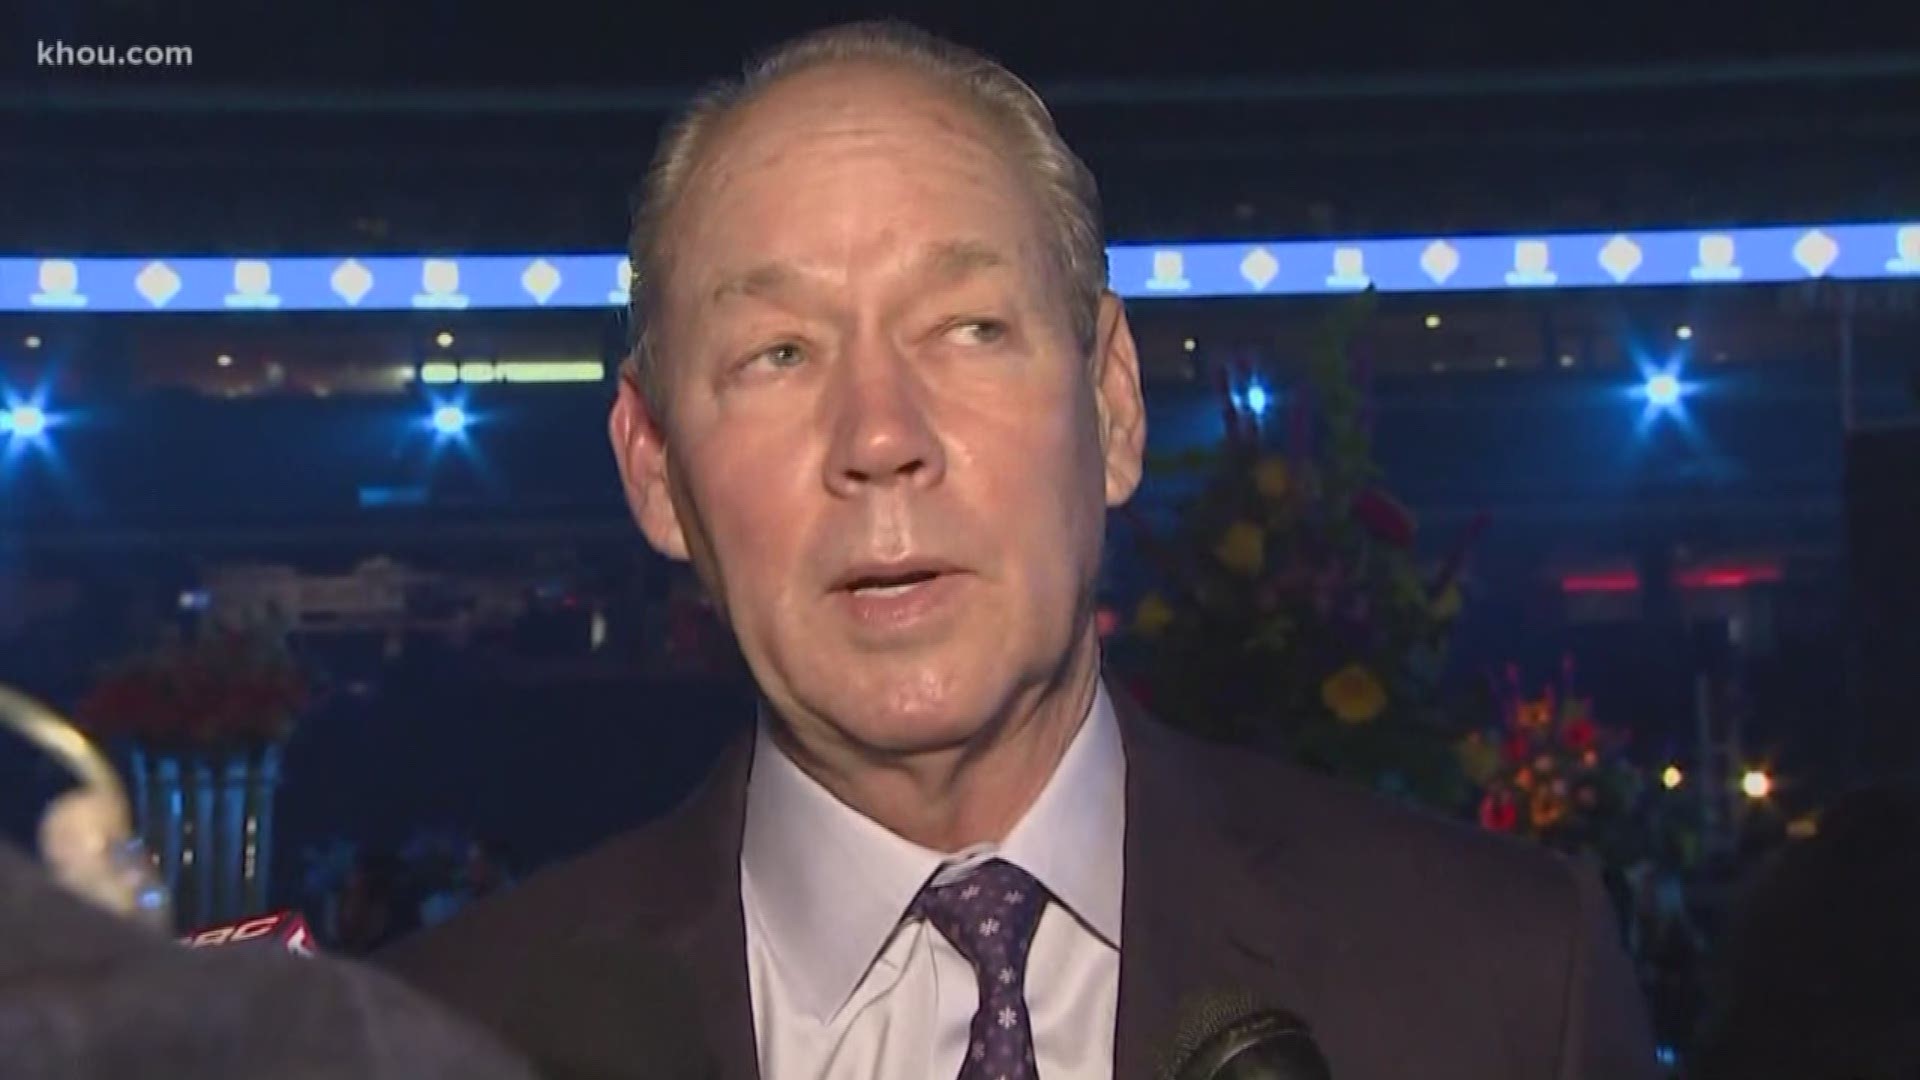 Astros owner Jim Crane spoke to KHOU 11 Sports' Matt Musil about the team's managerial search after A.J. Hinch was fired following Houston's sign-stealing scandal.